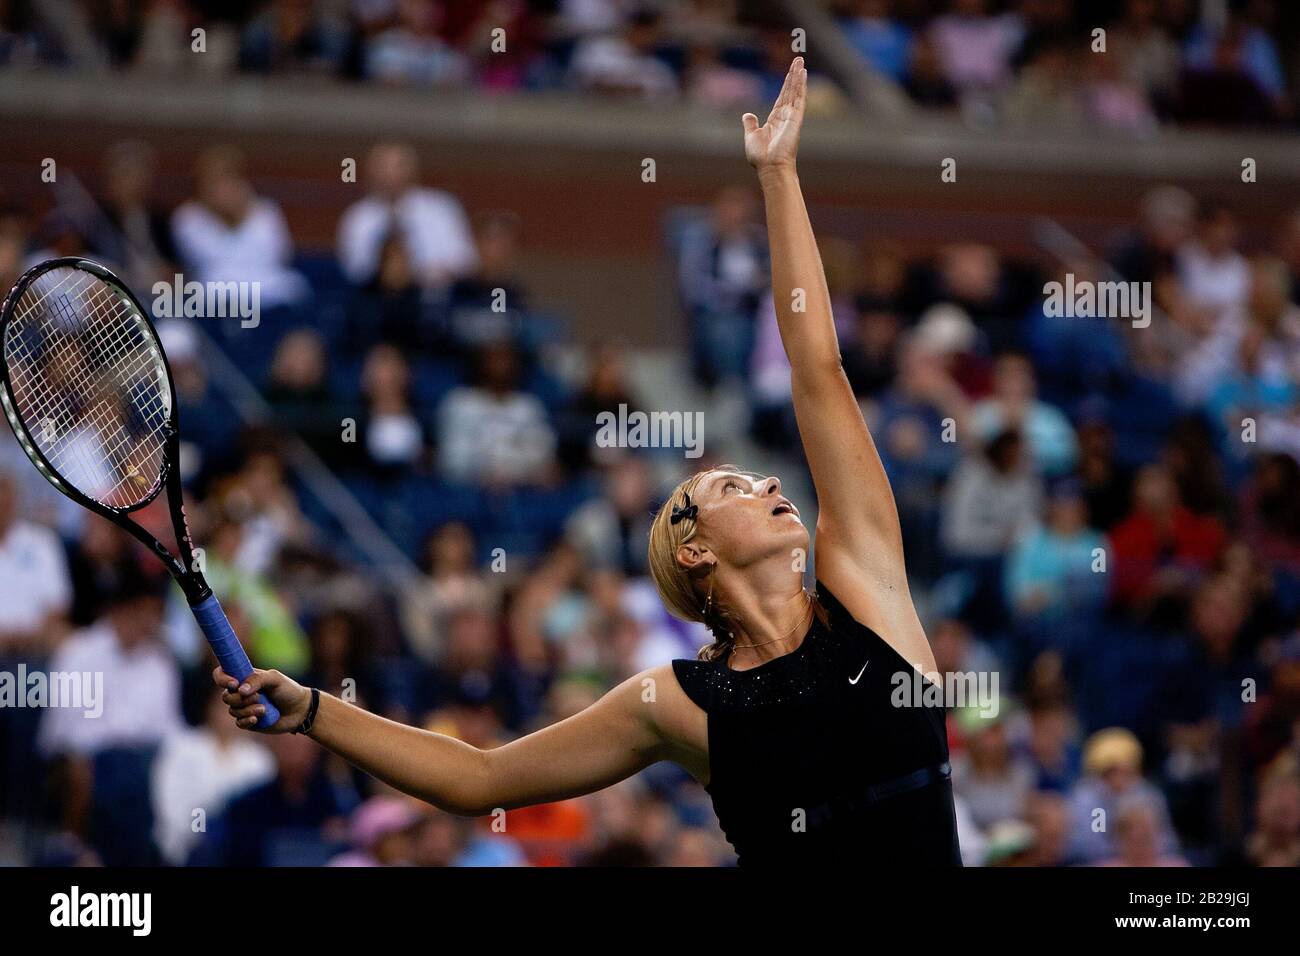 Maria Sharapova in action during her 2006 US Open victory at Flushing Meadows, New York. Sharapova, a five time grand slam champion, and one of the highest earning female athletes, announced her retirement from competitive tennis  this week. Stock Photo